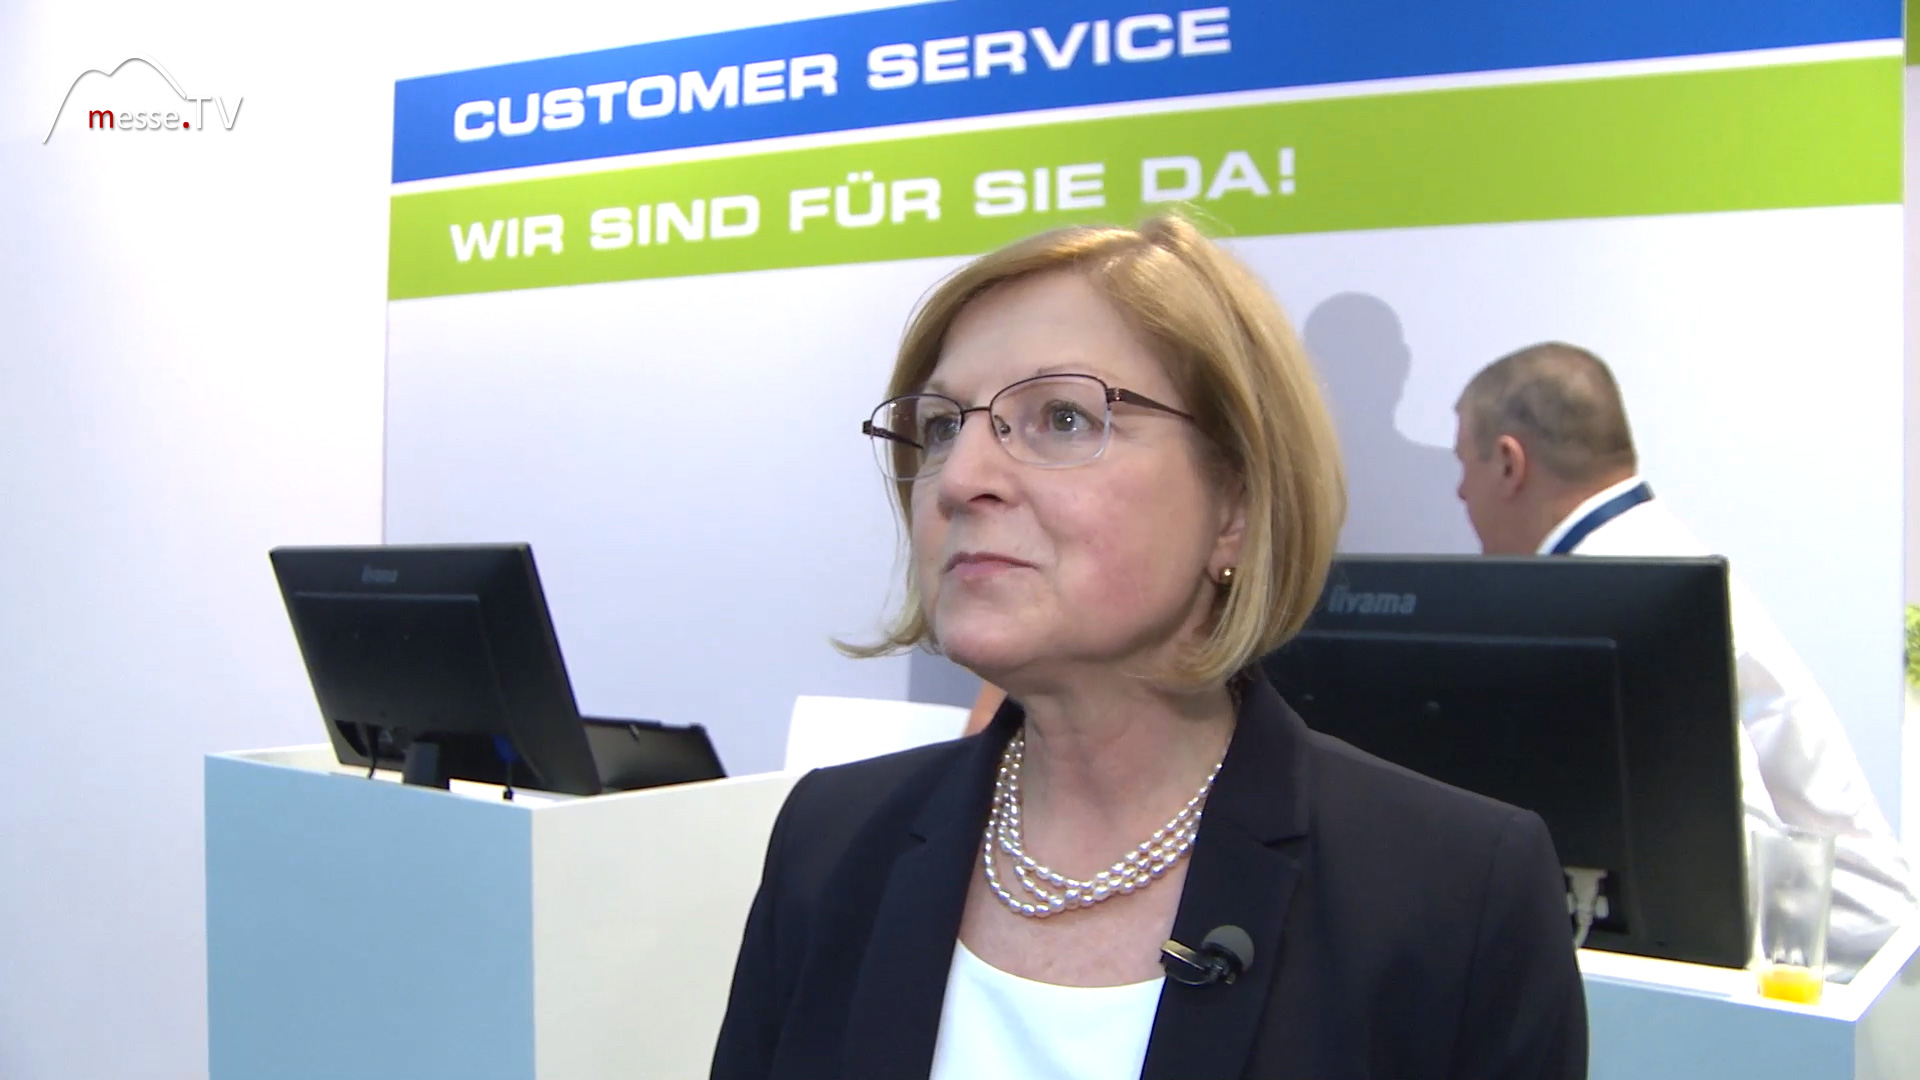 TOLL COLLECT Customer Service transport logistic 2019 München